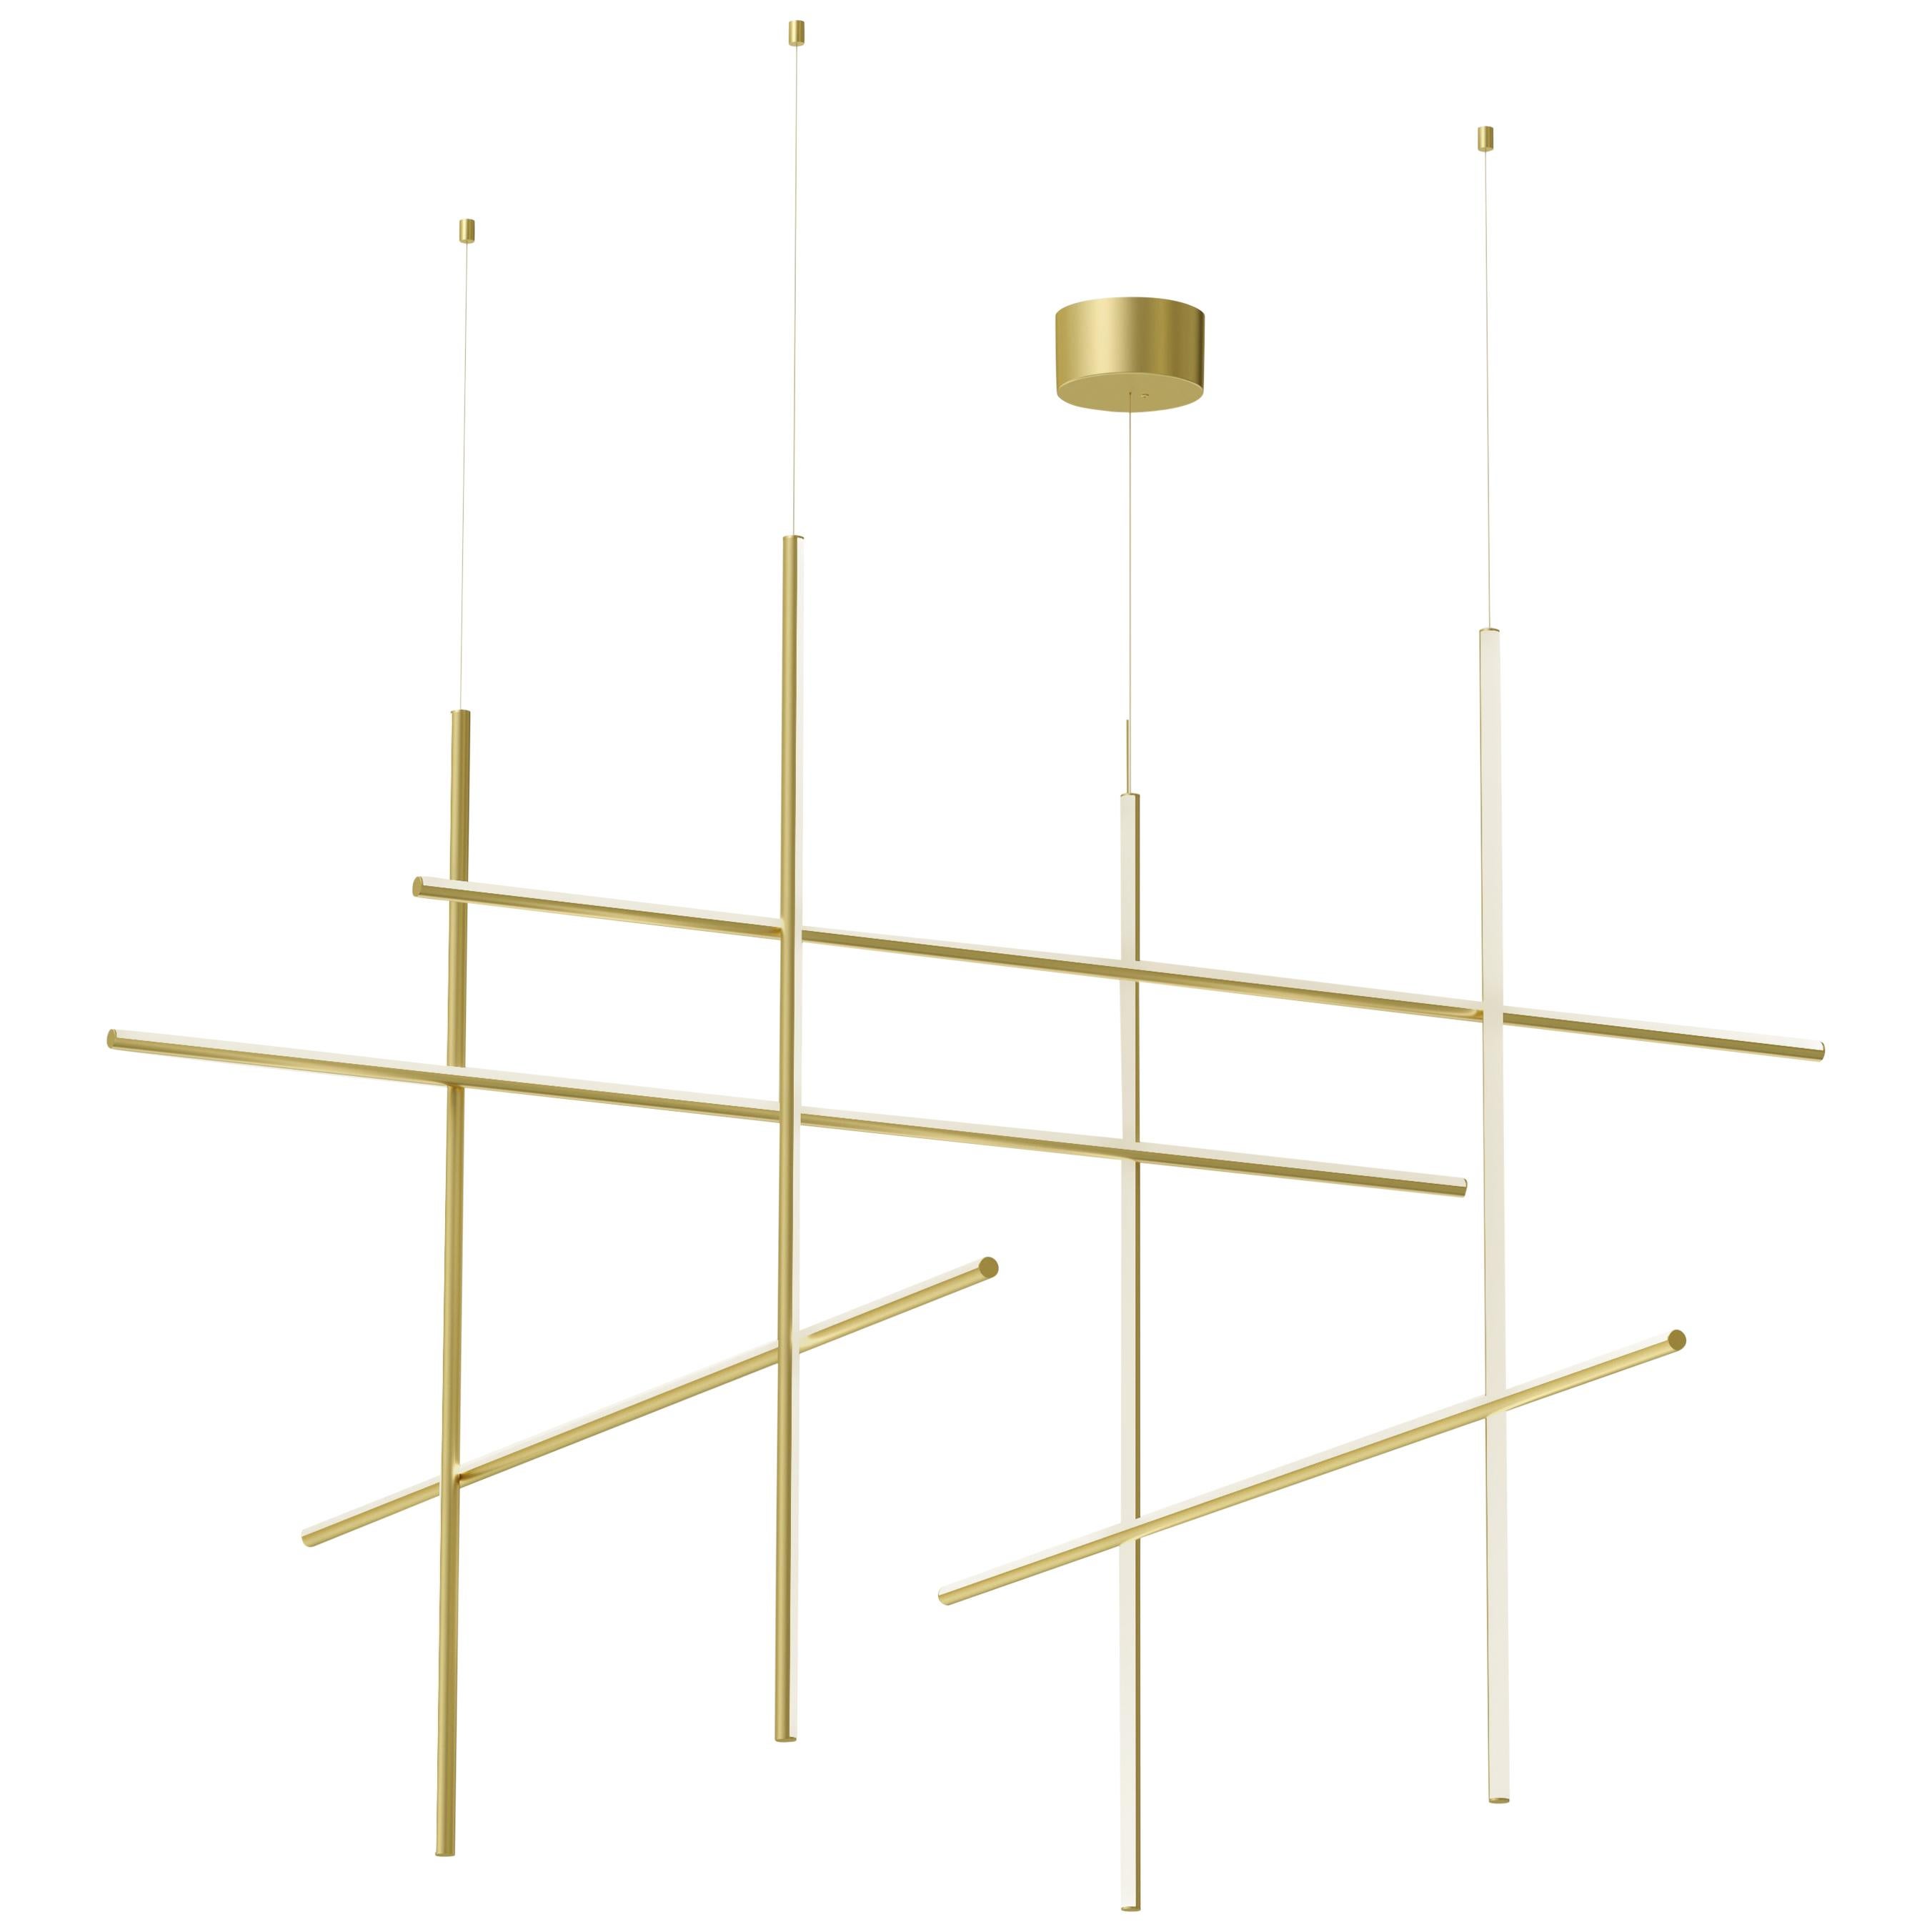 Flos Coordinates Module Suspension Light in Champagne by Michael Anastassiades For Sale